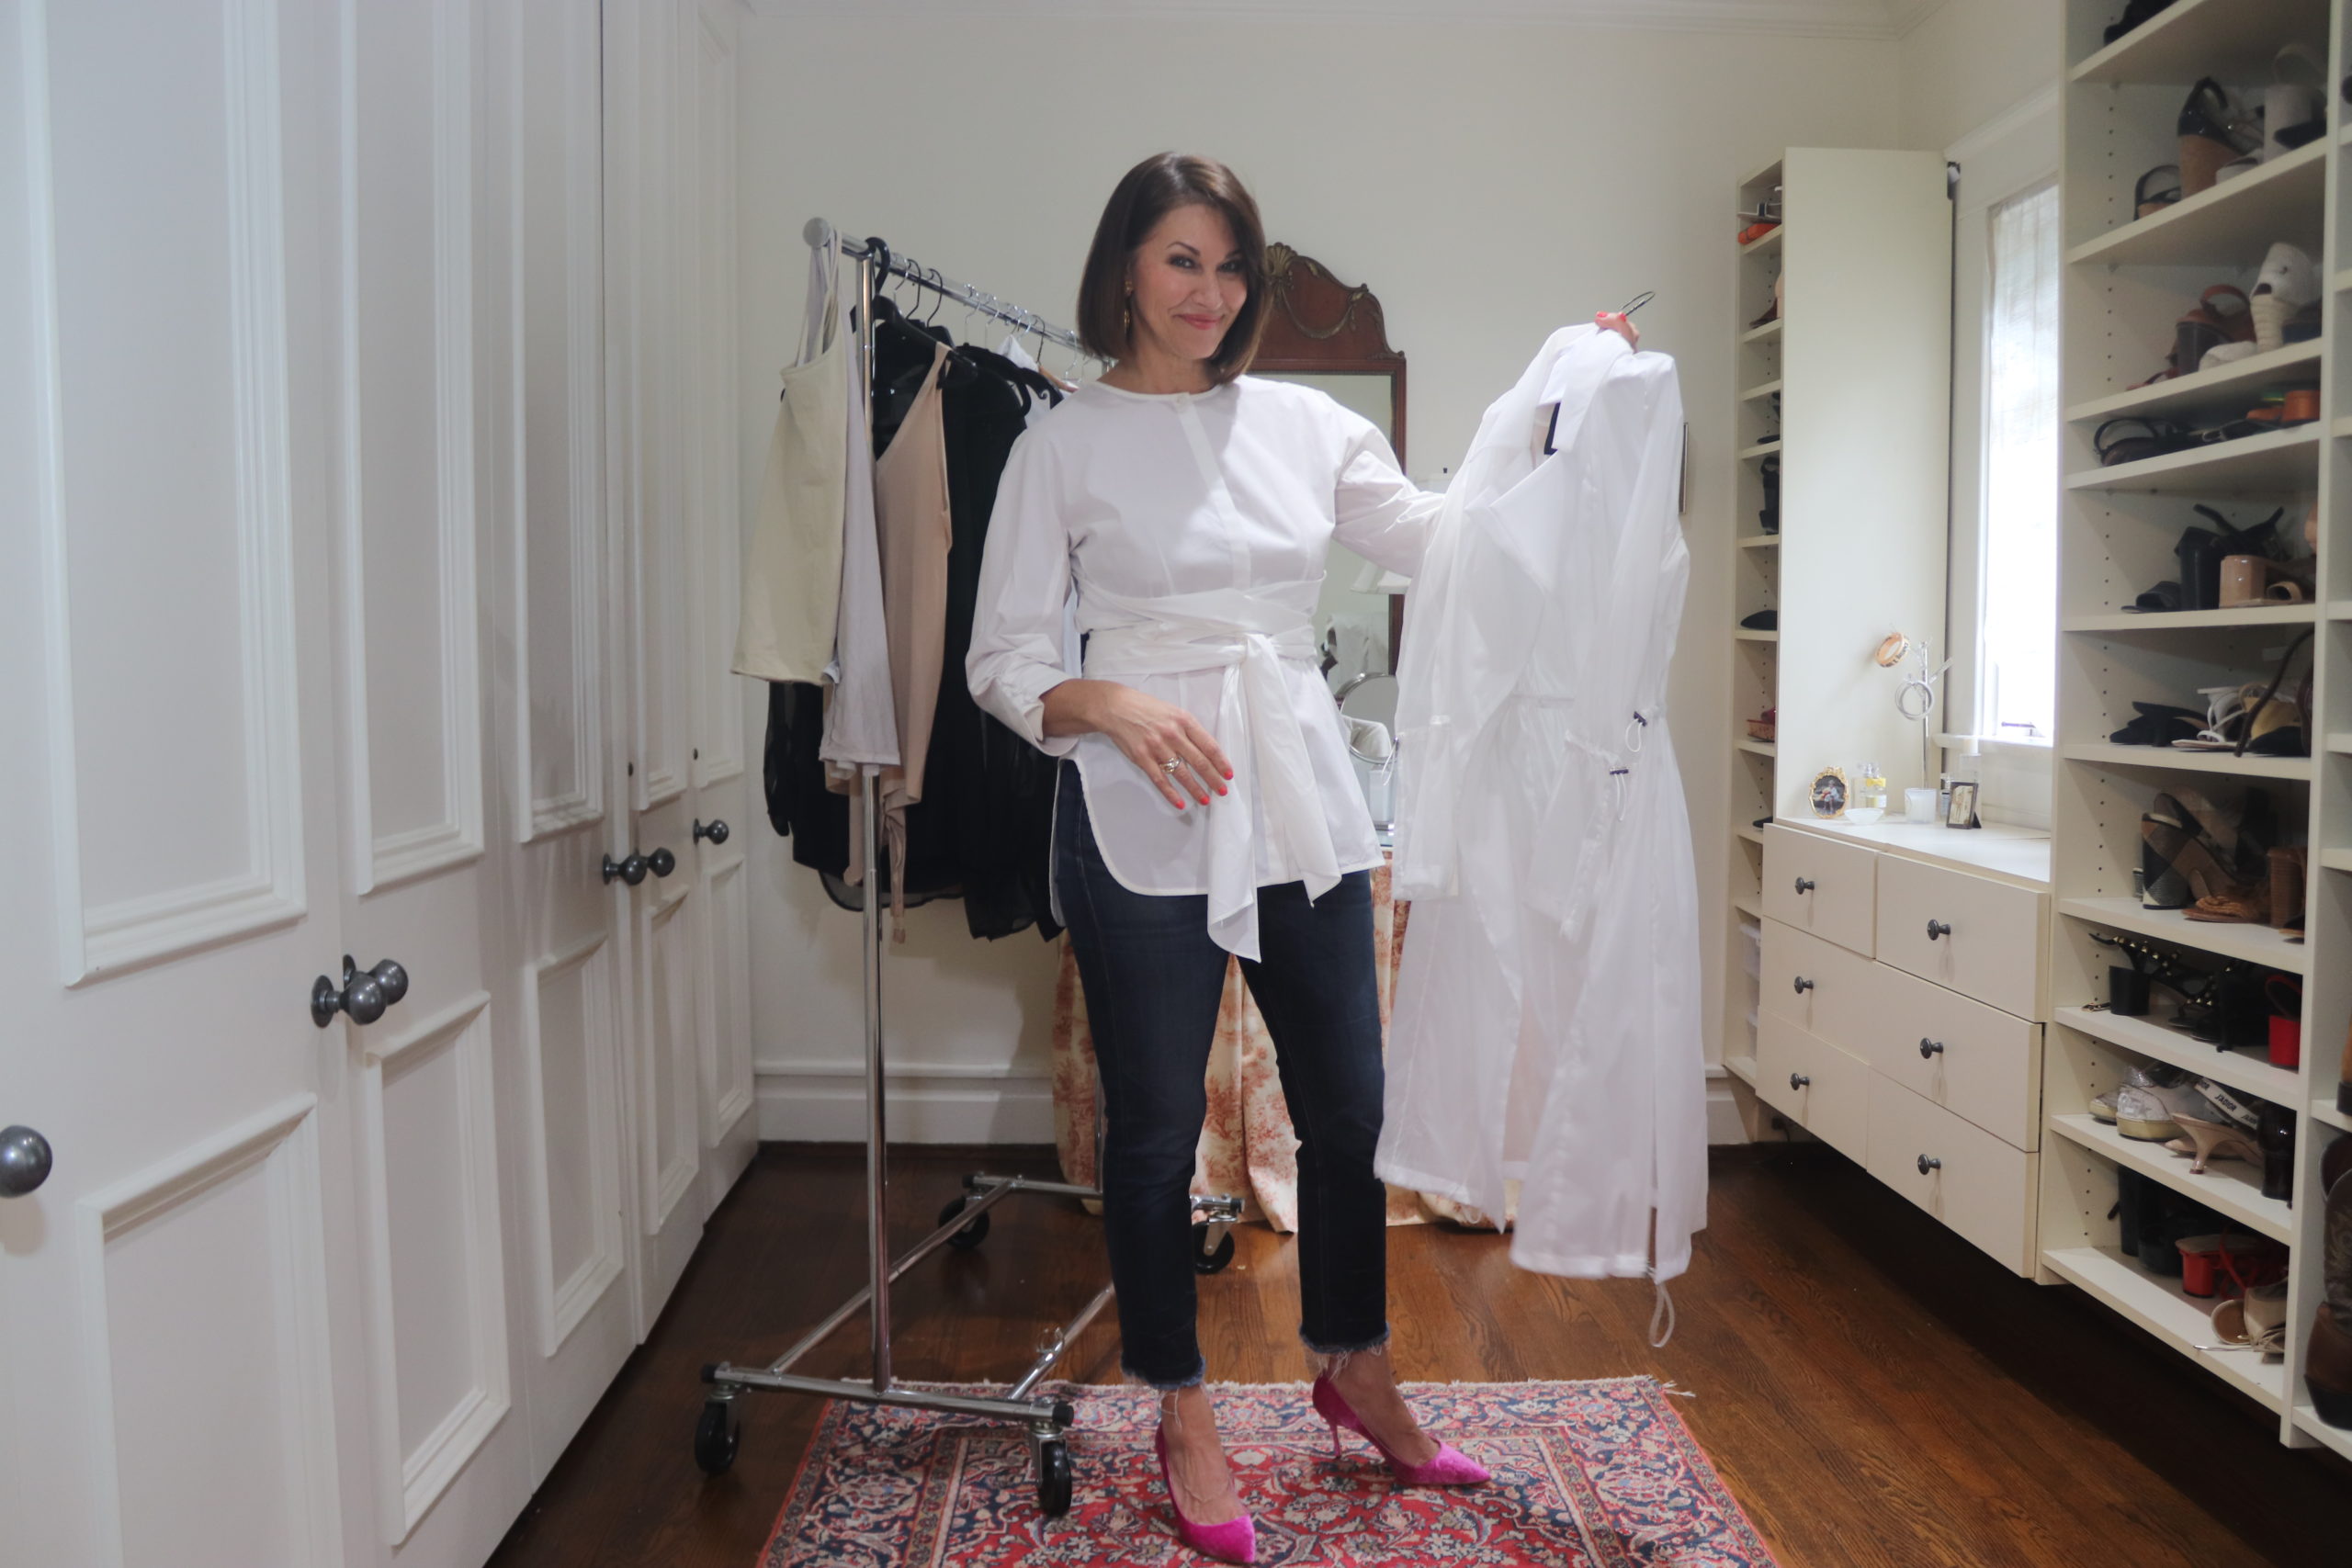 Woman wearing a white shirt, jeans and pink pumps standing in a closet